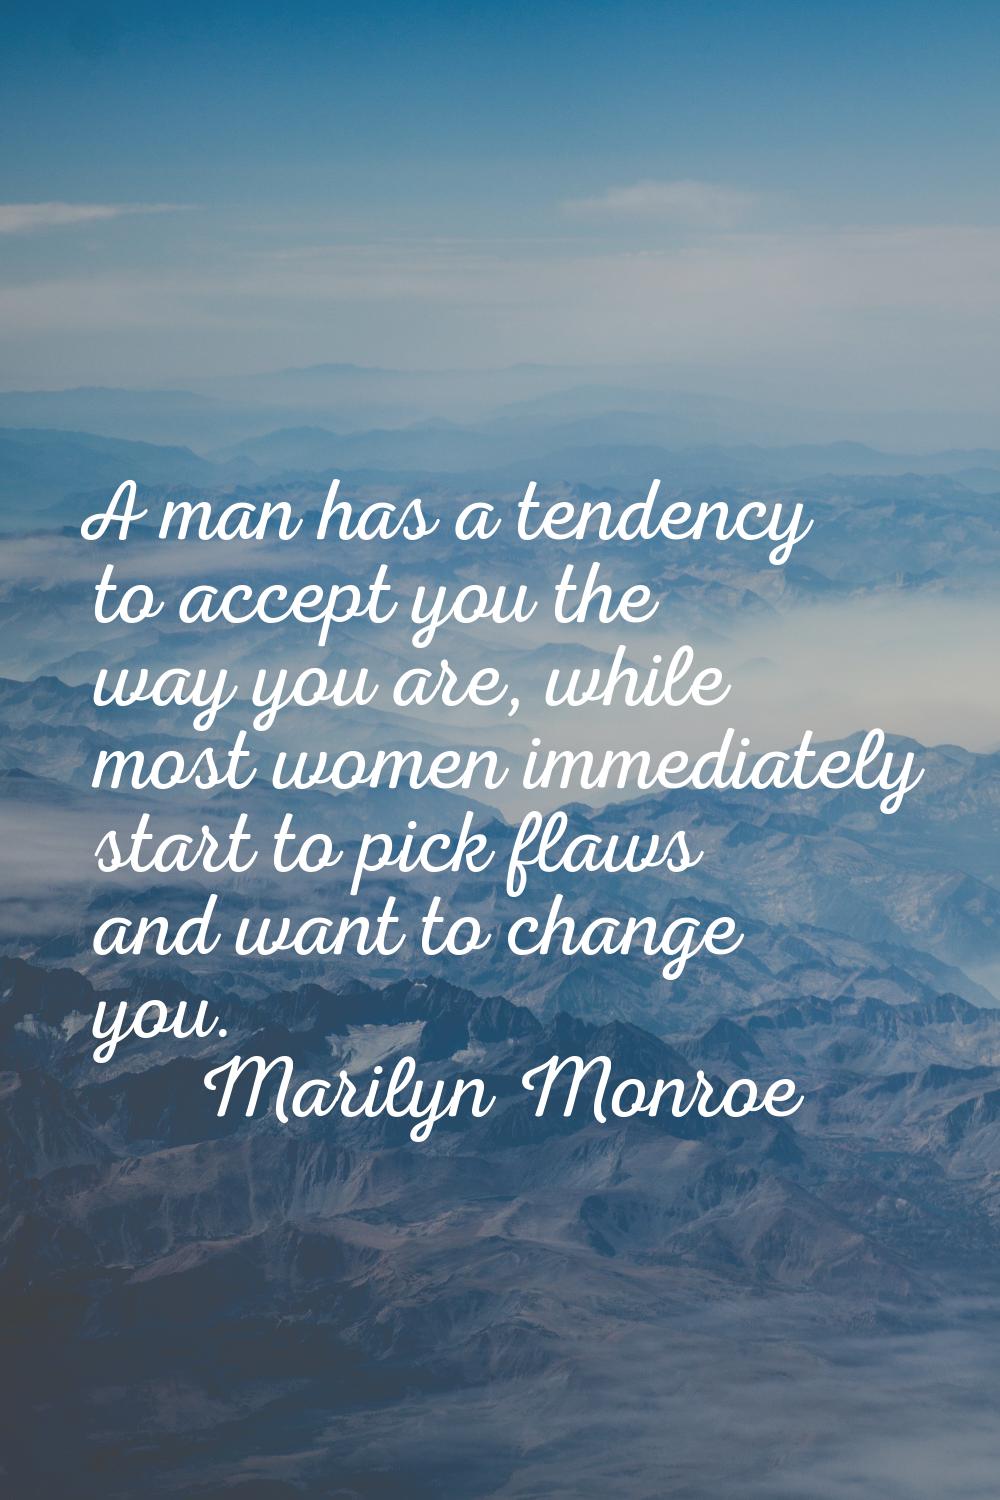 A man has a tendency to accept you the way you are, while most women immediately start to pick flaw